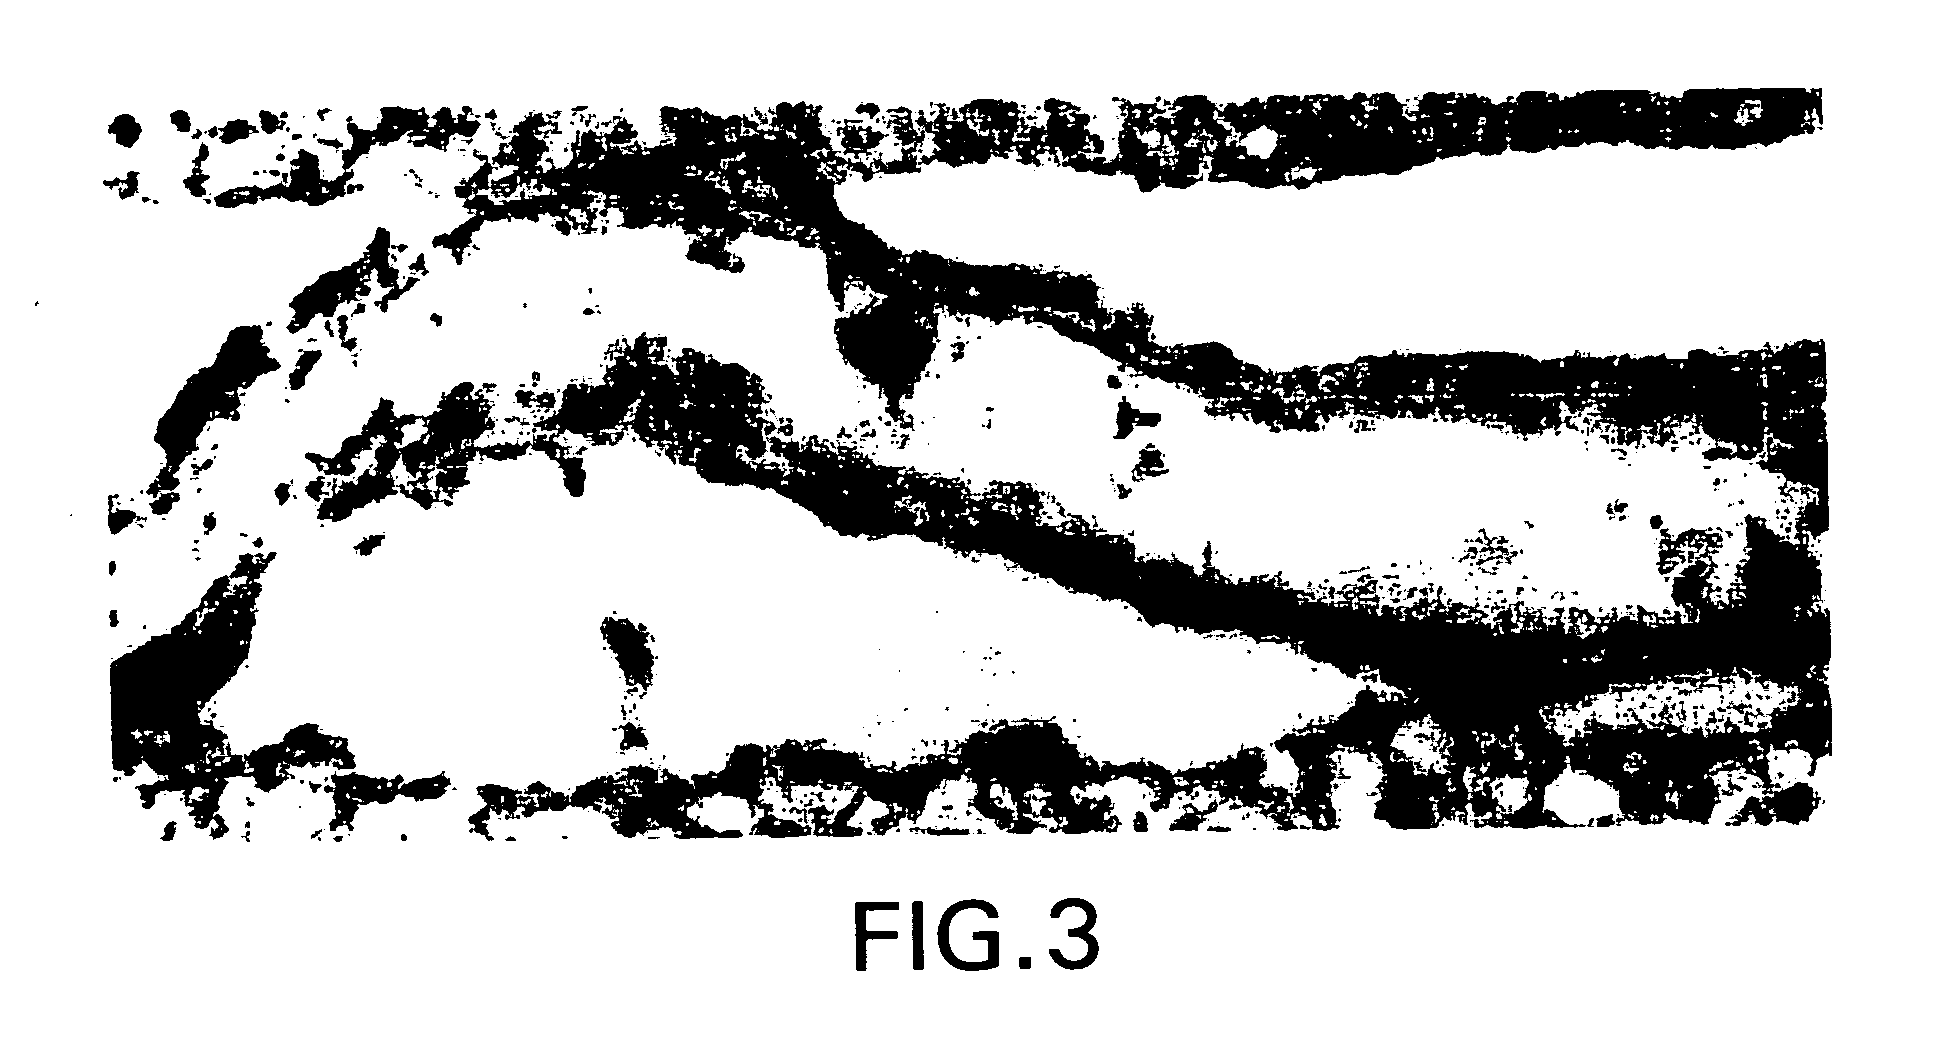 Recombinant tissue protective cytokines and encoding nucleic acids thereof for protection, restoration, and enhancement of responsive cells, tissues, and organs